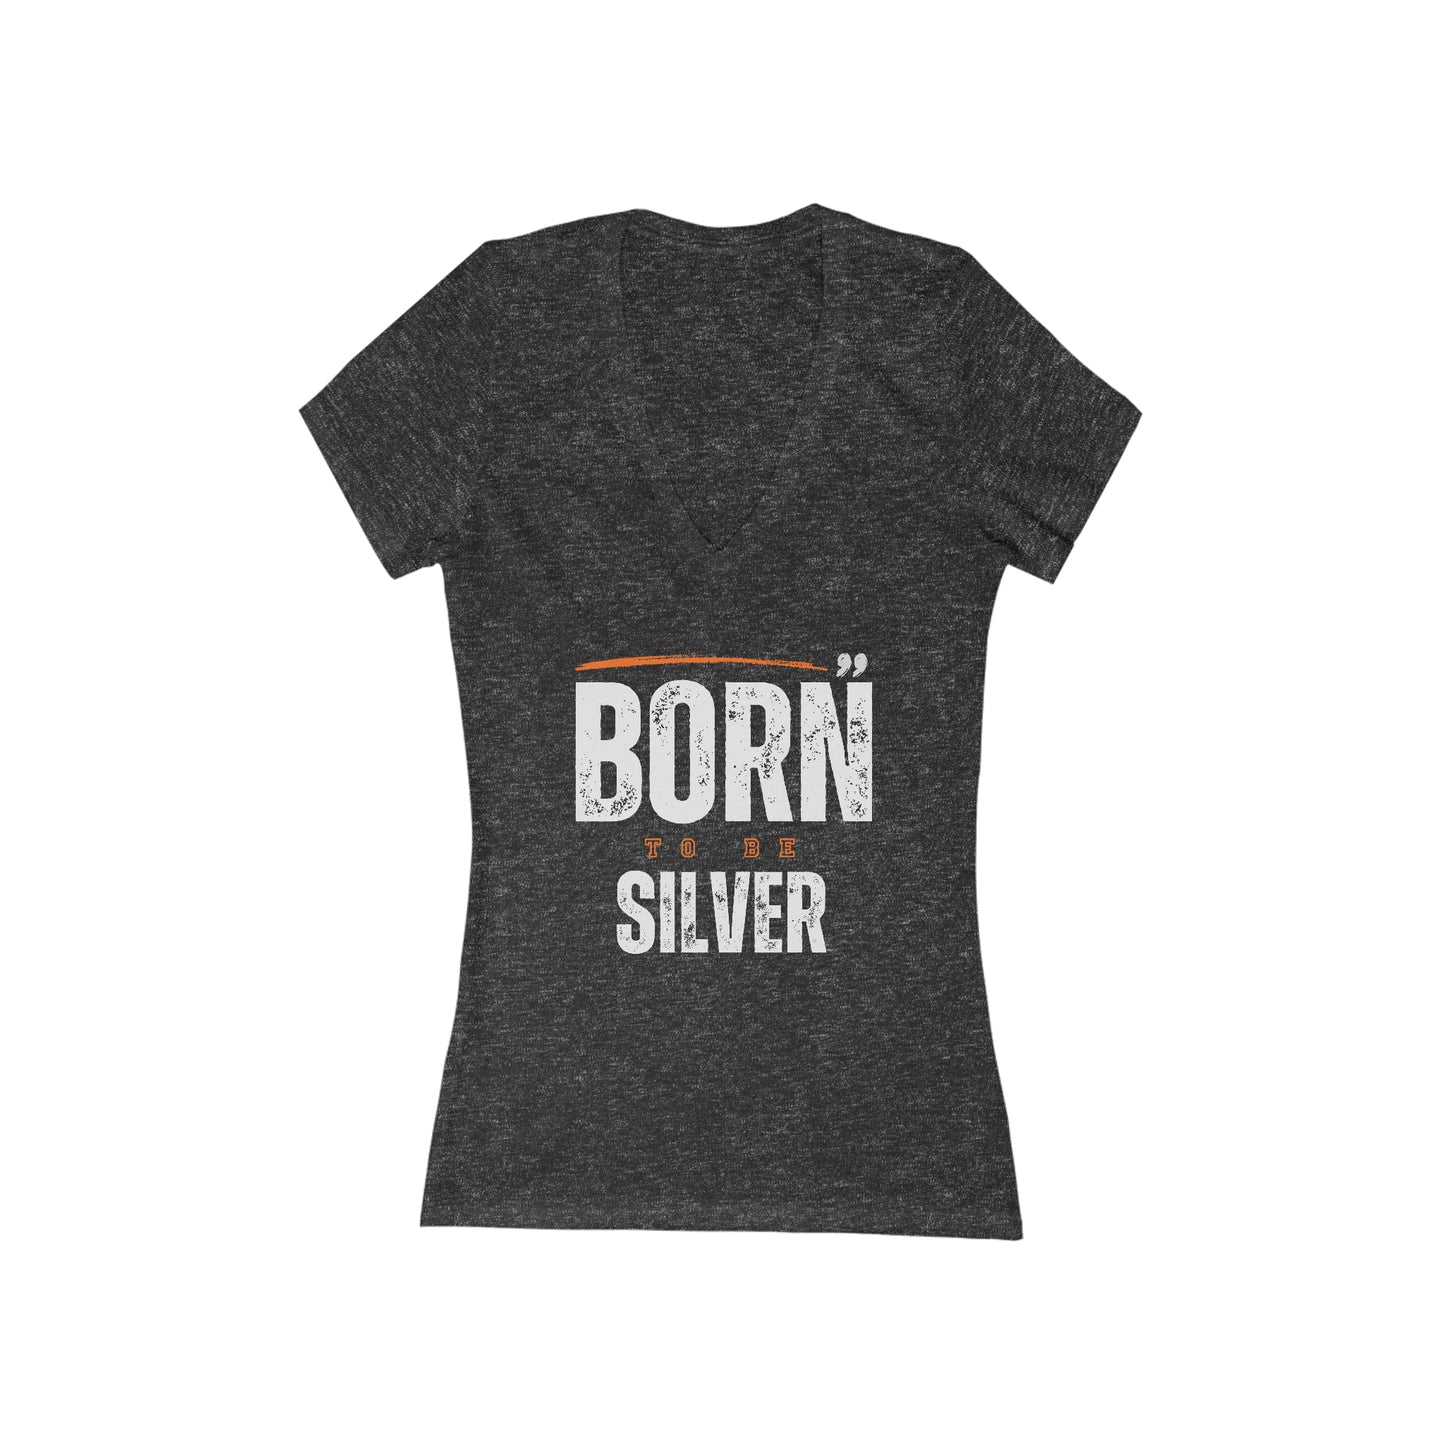 BORN To Be SILVER, short sleeve deep v-neck t-shirt, for women embracing silver and gray hair